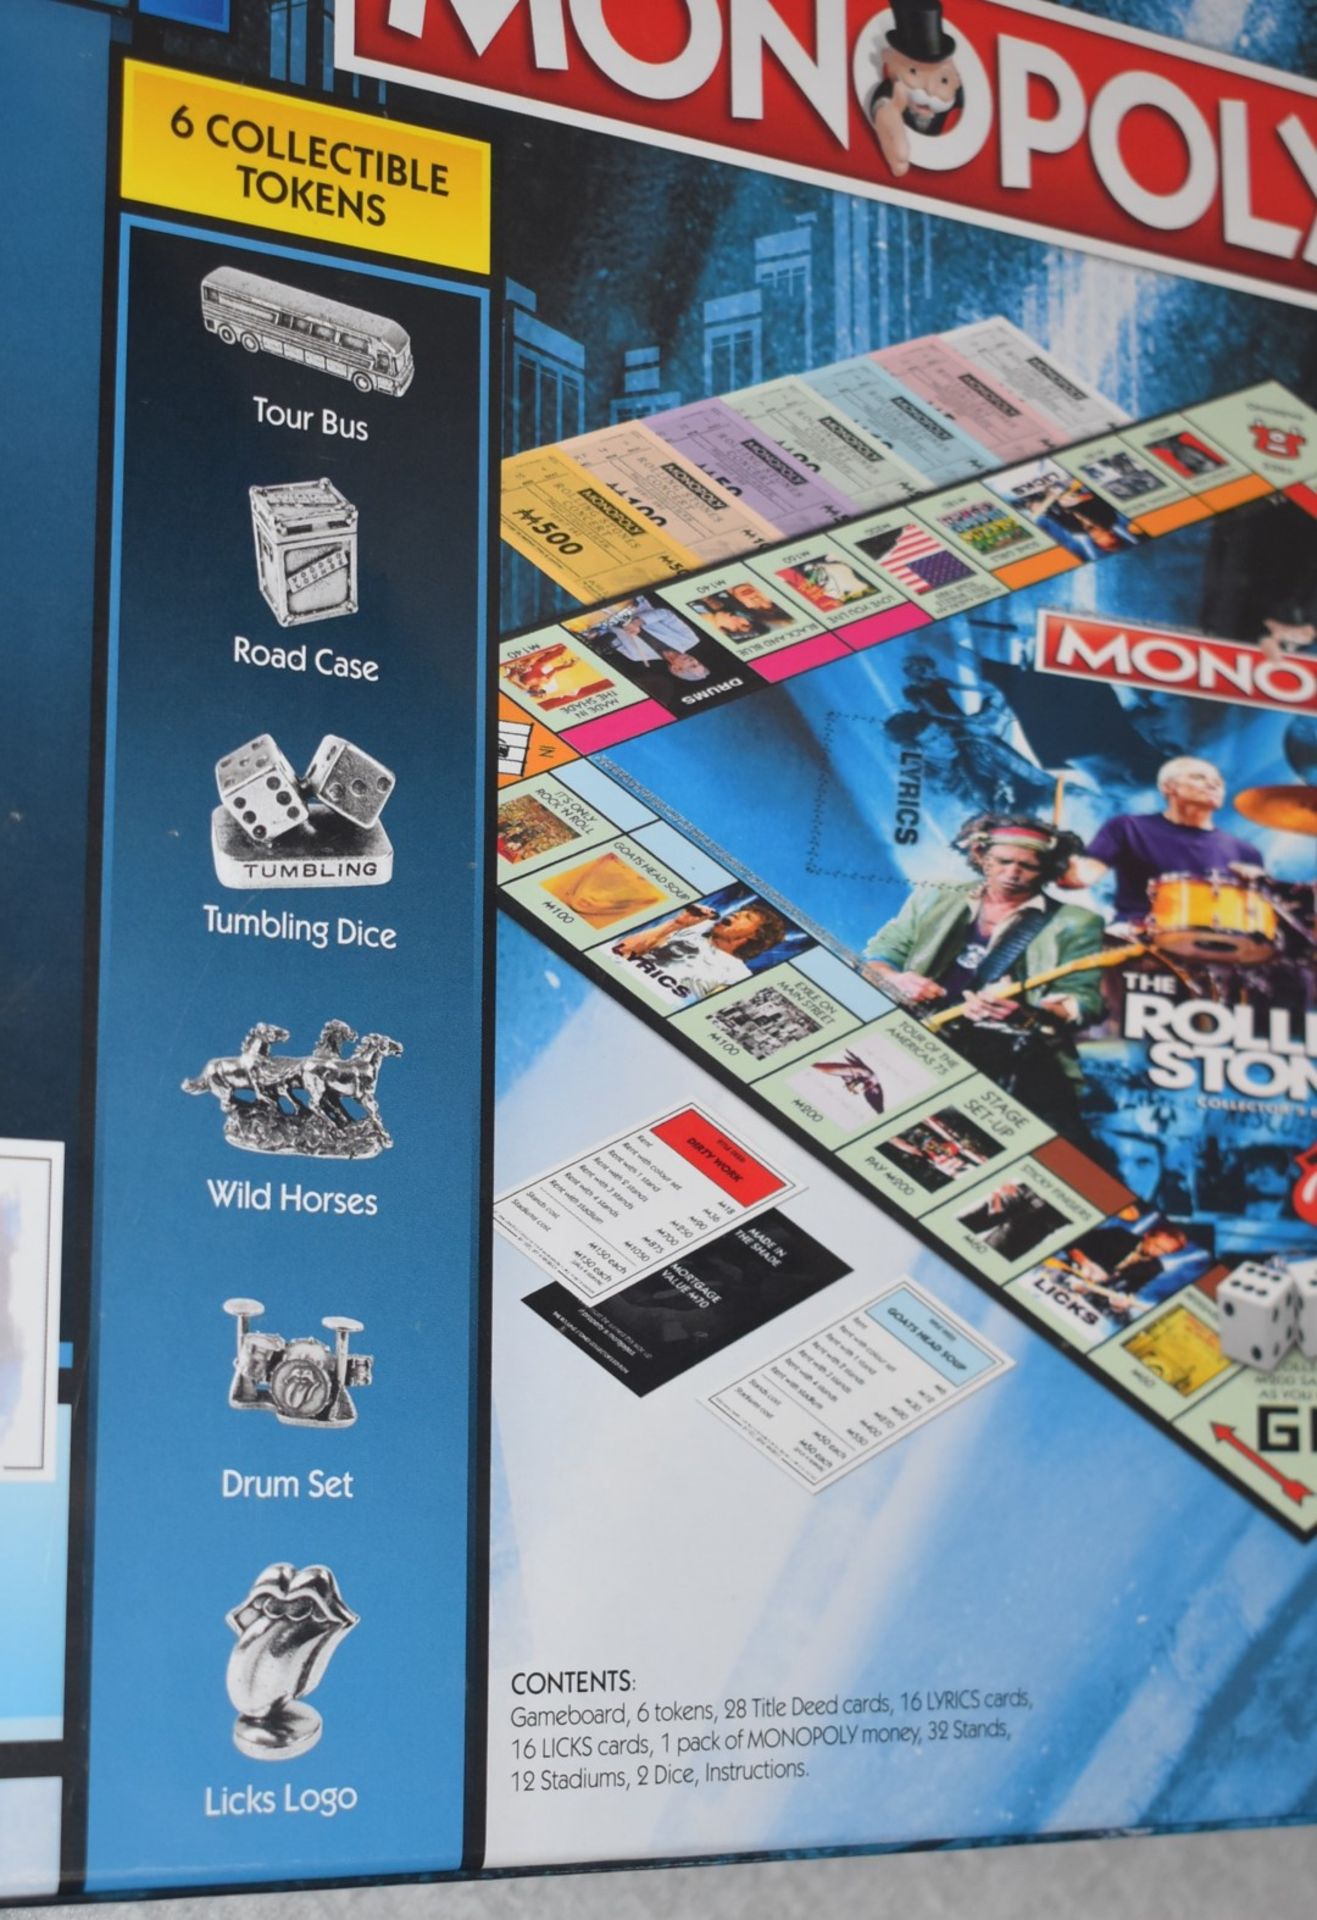 1 x MONOPOLY Collectors Edition ROLLING STONES Board Game - New and Sealed - CL720 - Ref: CA - - Image 3 of 3